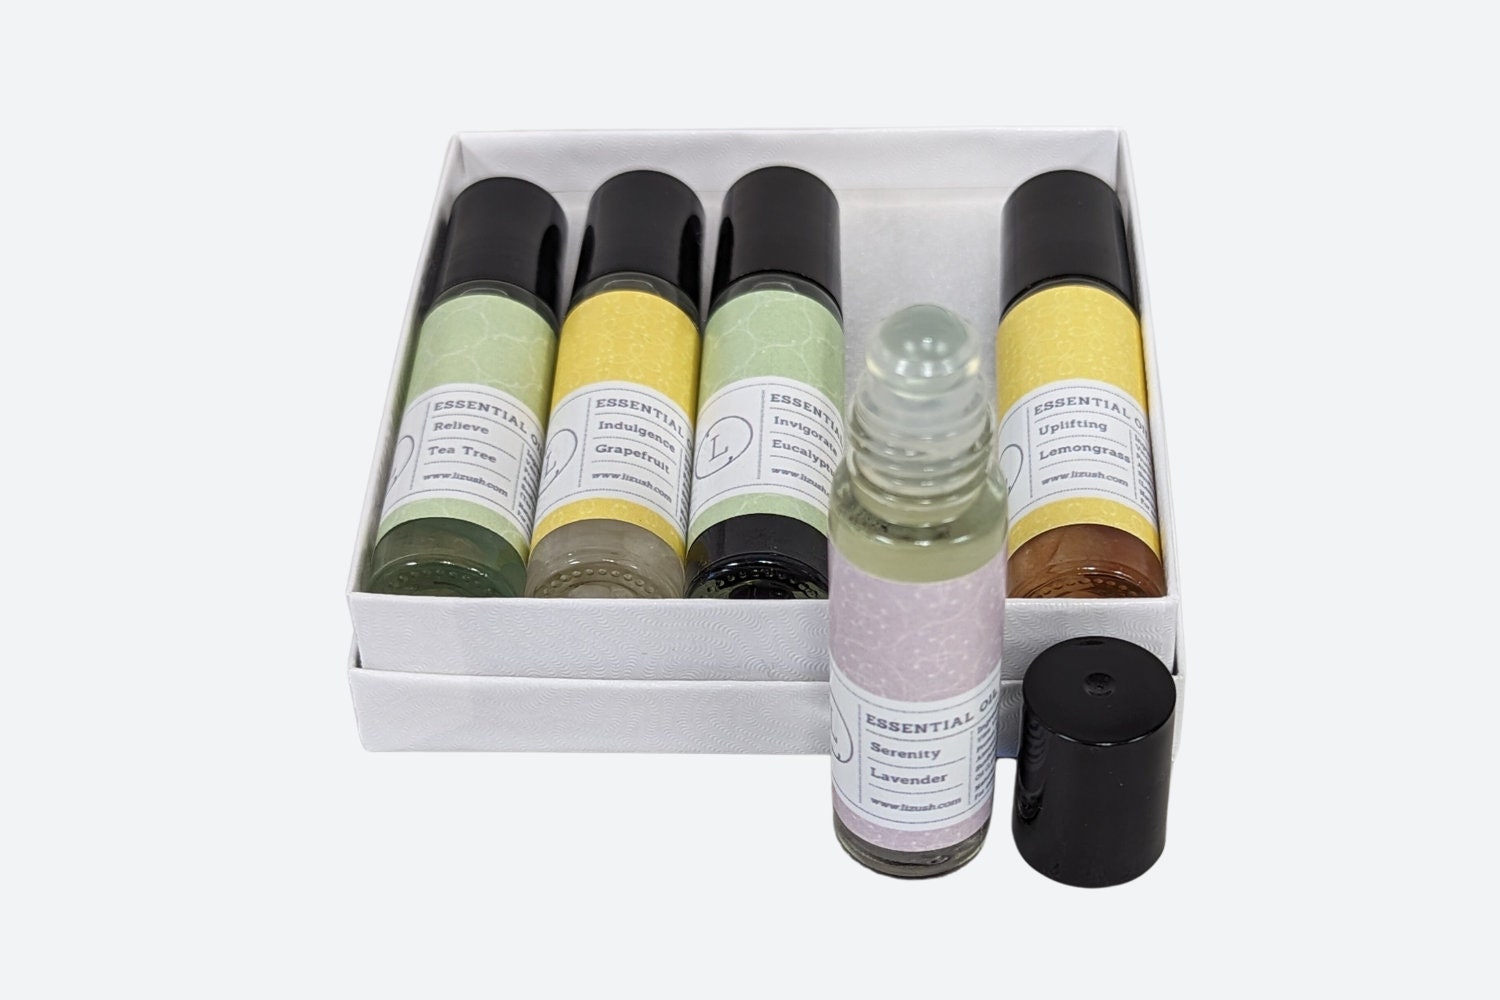 Gift set of 5 Crystals Essential Oil Blend Roller | All Natural Roll on Perfume| Set of 5 Aromatherapy perfume | Anxiety Relief photo